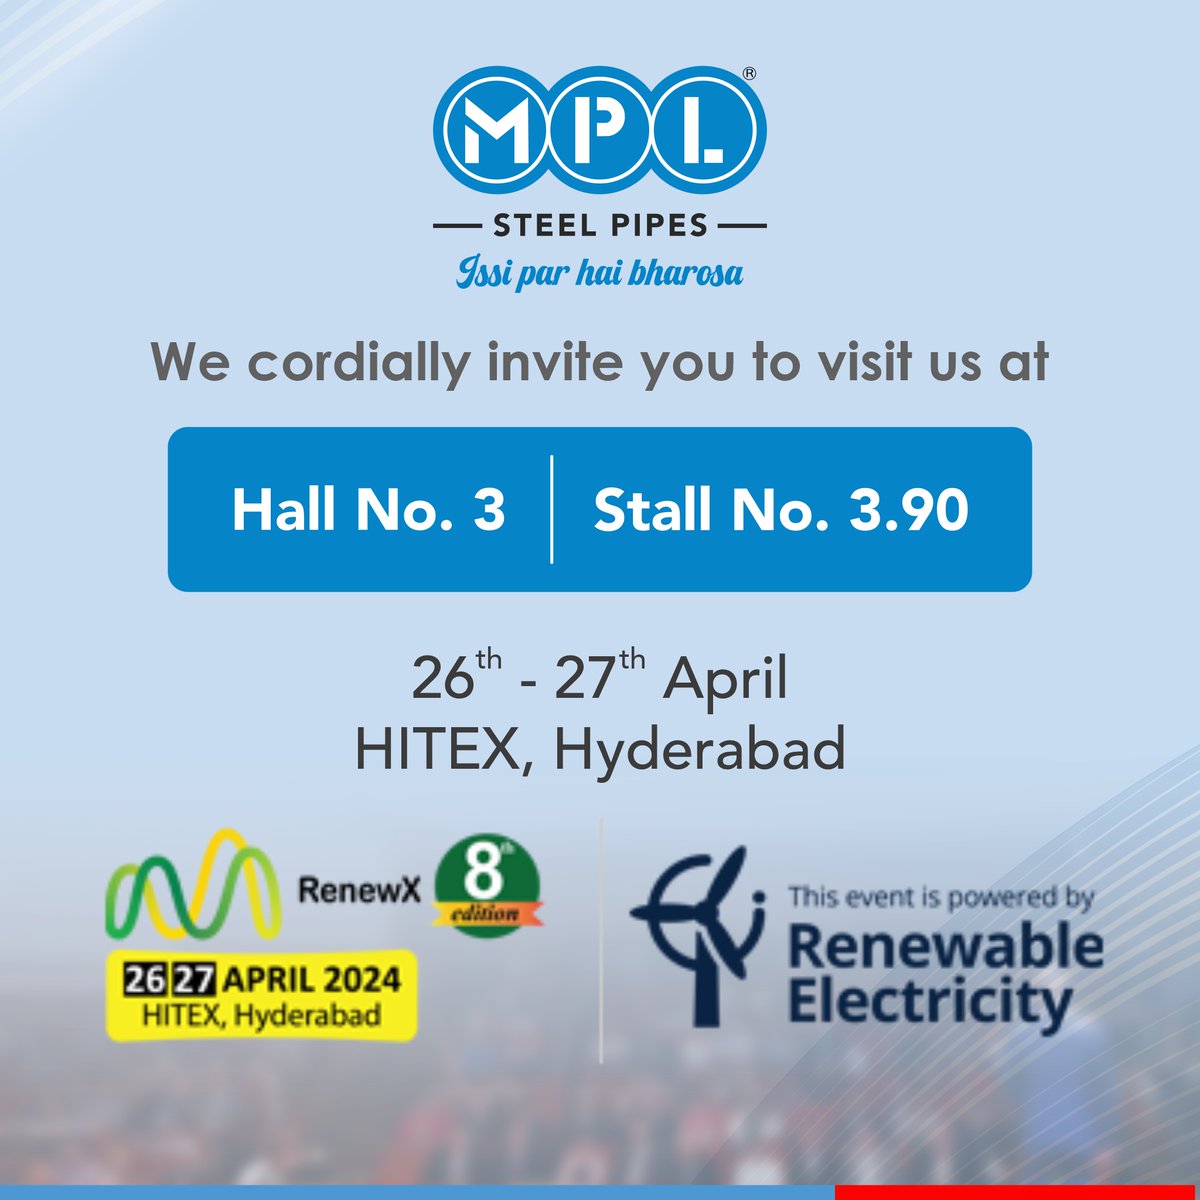 Join us at Stall 3.90, Hall 3 in Hitex Exhibition Centre, Hyderabad at RenewX 2024!

#MPLSteelPipes #IssiParHaiBharosa #steelindustry #MSPipes #renewx2024 #RenewX #renewablenergy #sustainability #exhibition #expo #expo2024 #exhibition2024 #Conference #conference2024